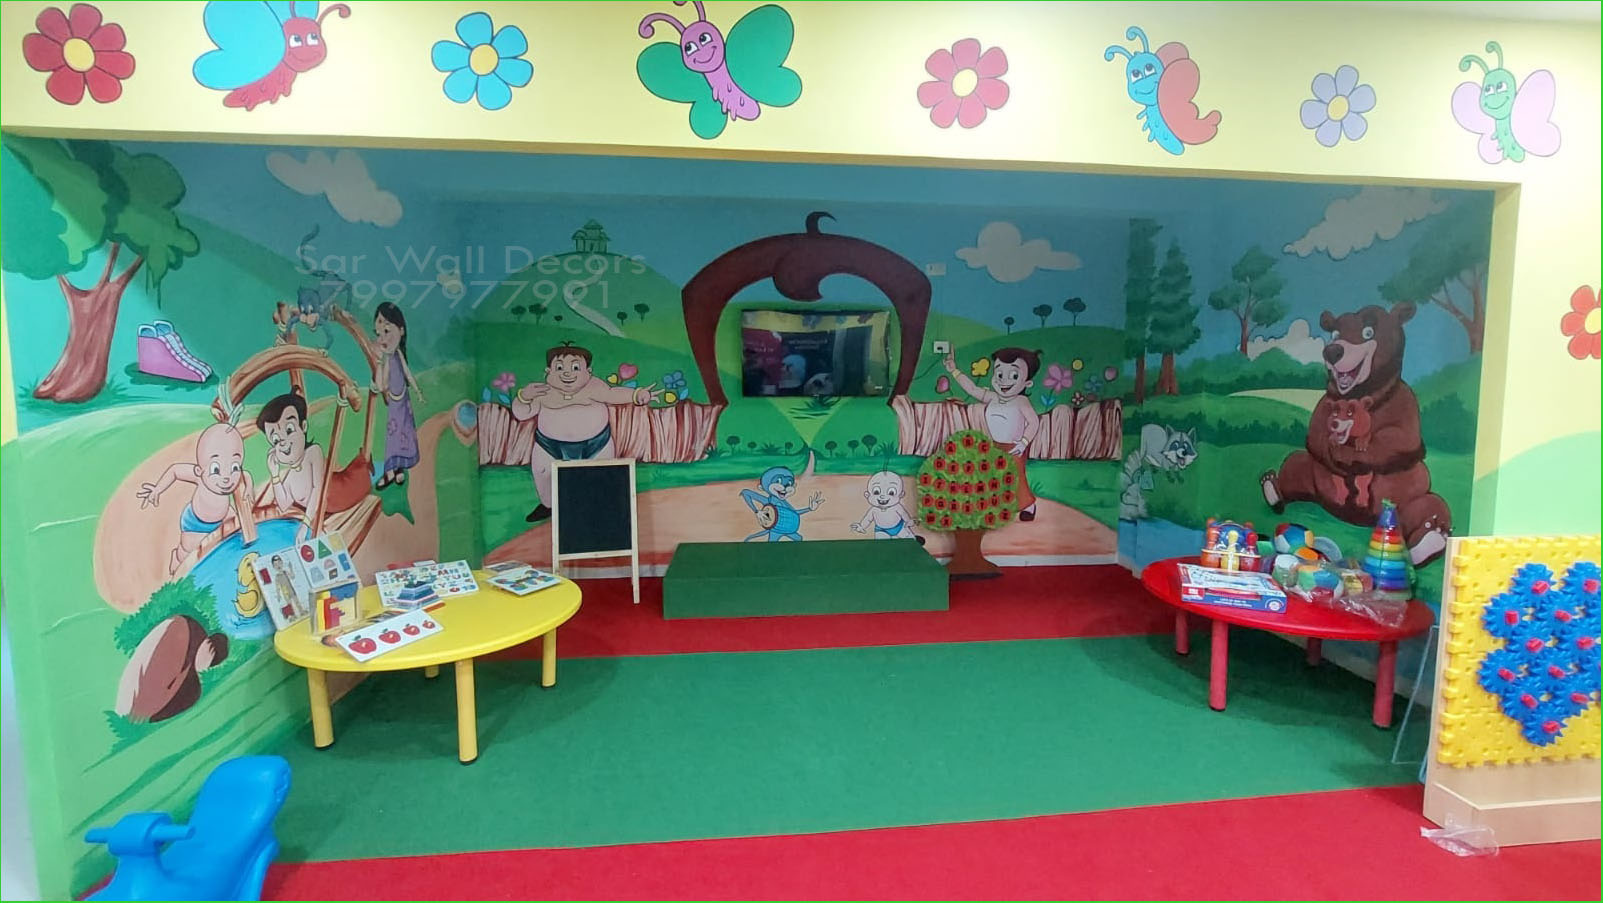 Play School Wall Images From MadhapurServicesInterior Designers - ArchitectsAll Indiaother